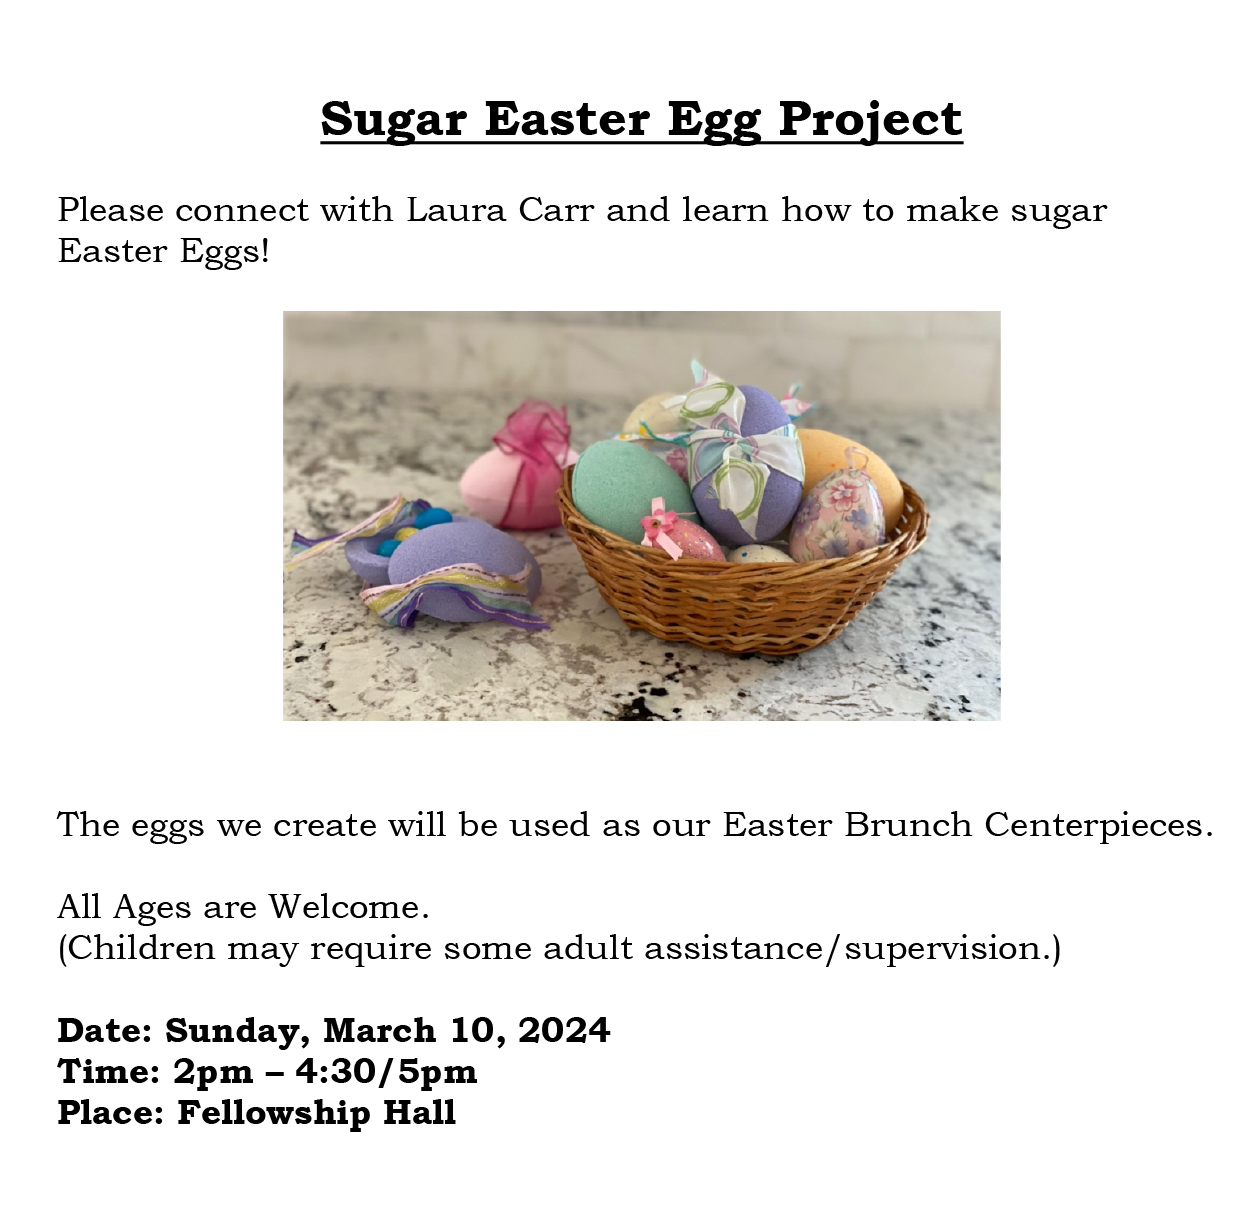 Sugar Easter Egg Project